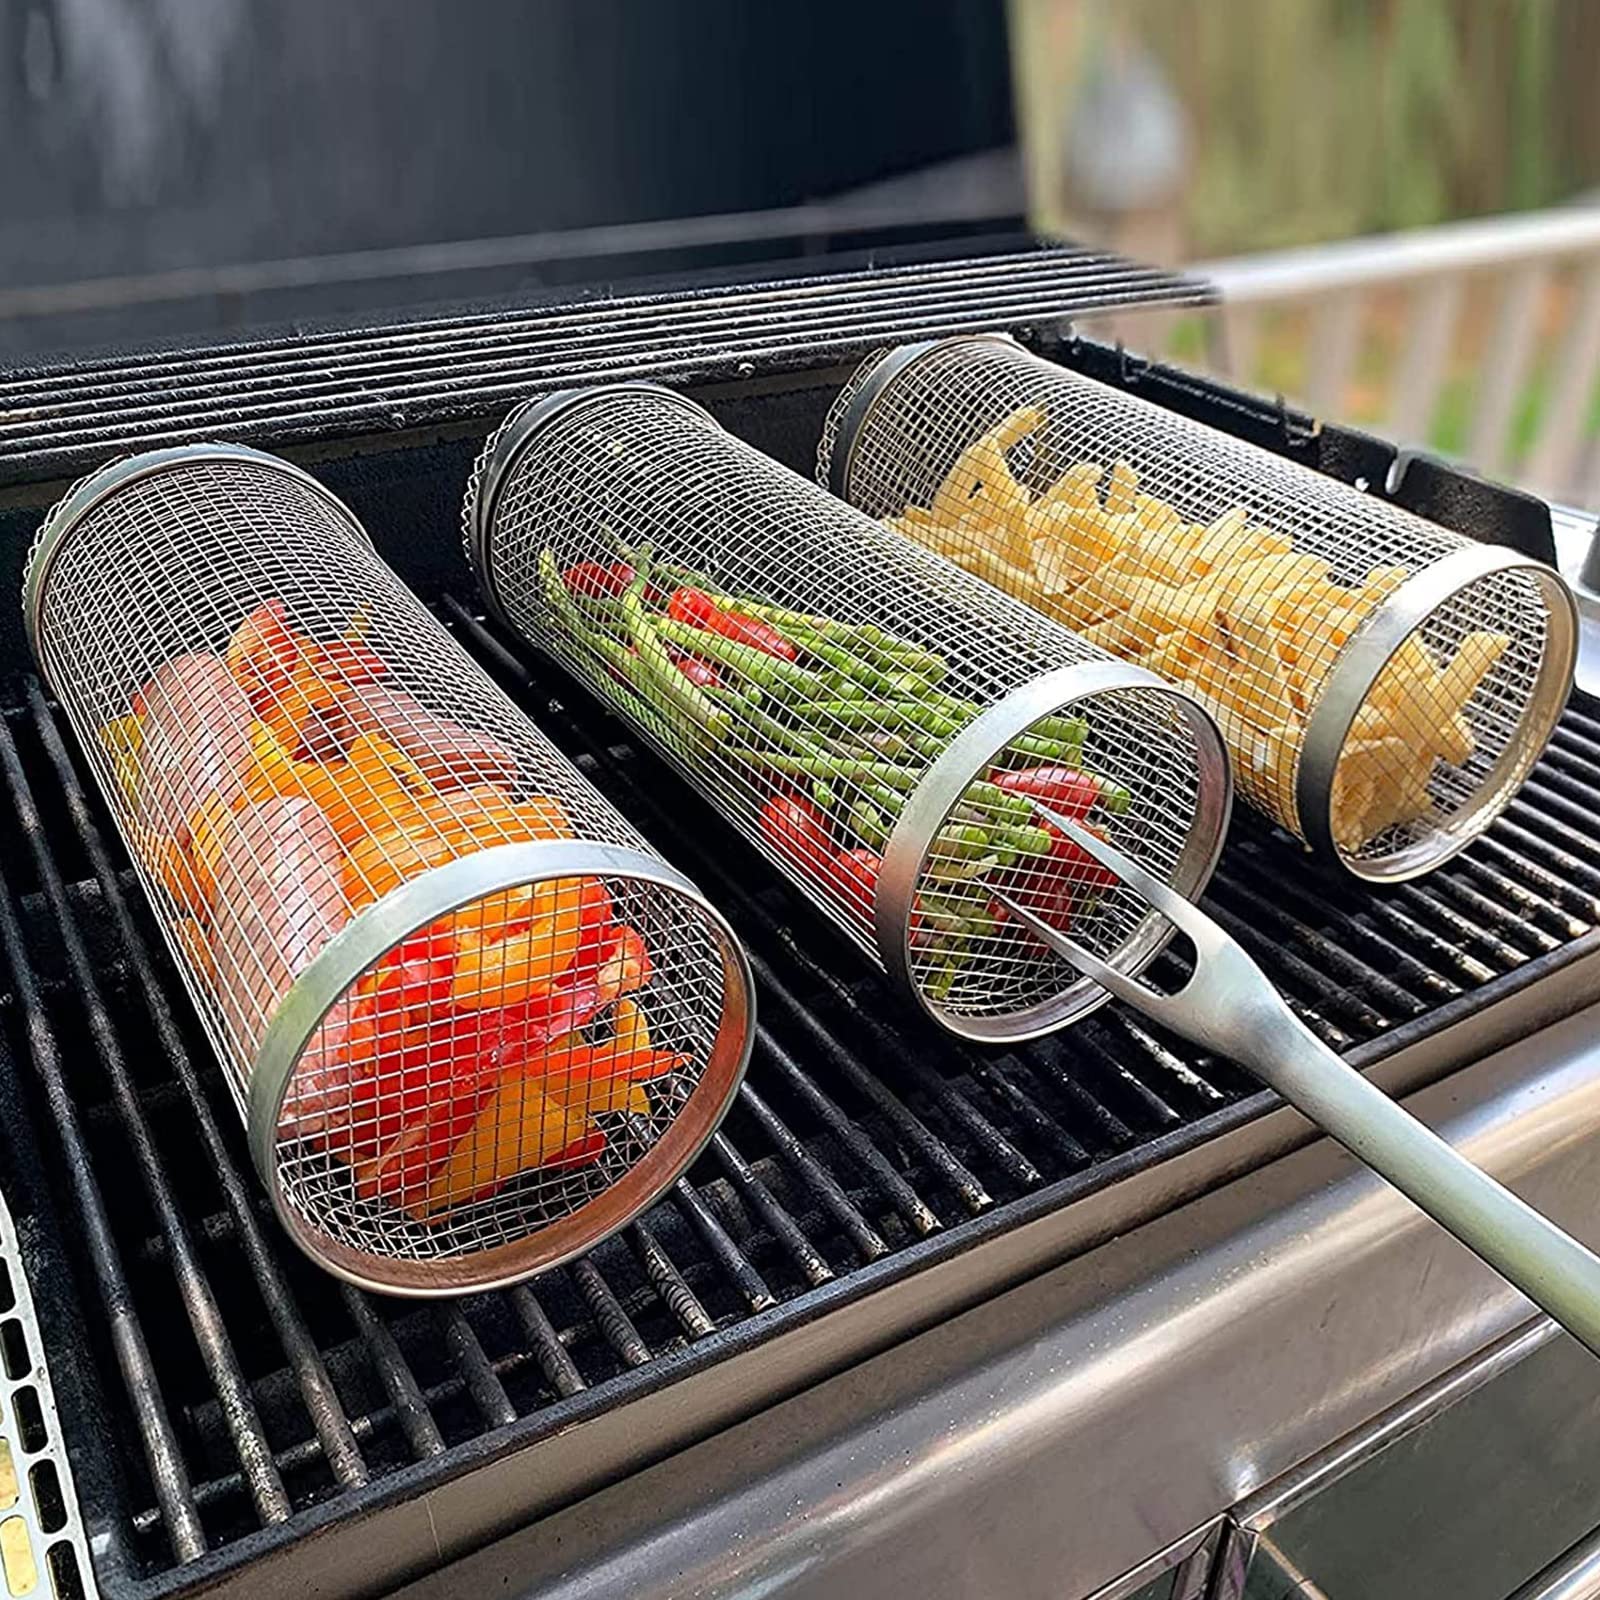 Use tongs to turn the basket regularly to grill the food evenly on all sides.